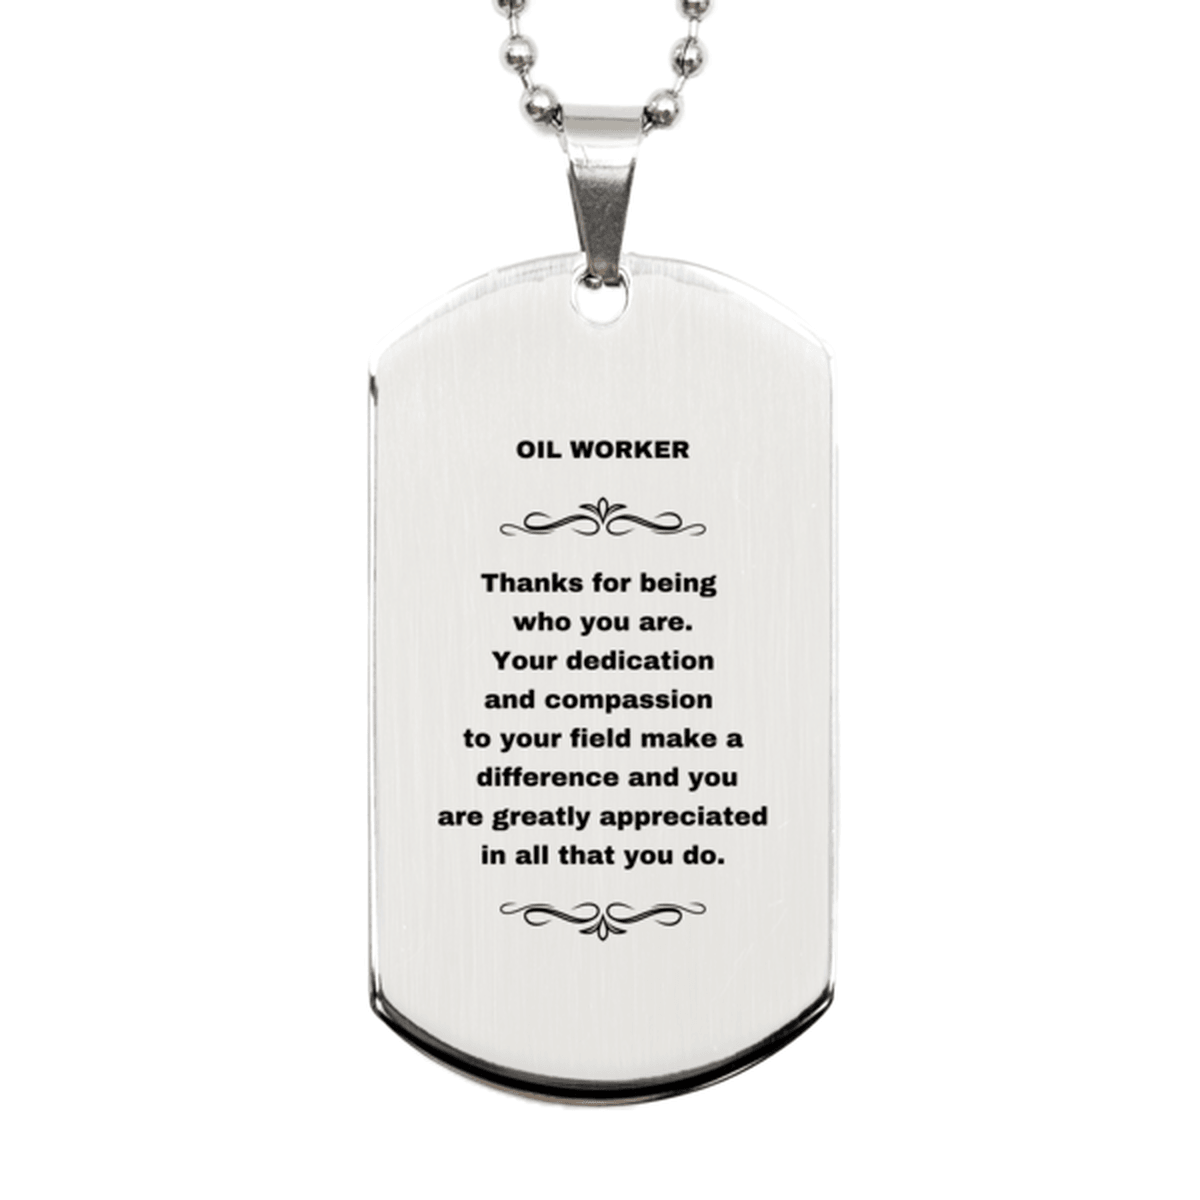 Oil Worker Silver Dog Tag Necklace - Thanks for being who you are - Birthday Christmas Jewelry Gifts Coworkers Colleague Boss - Mallard Moon Gift Shop